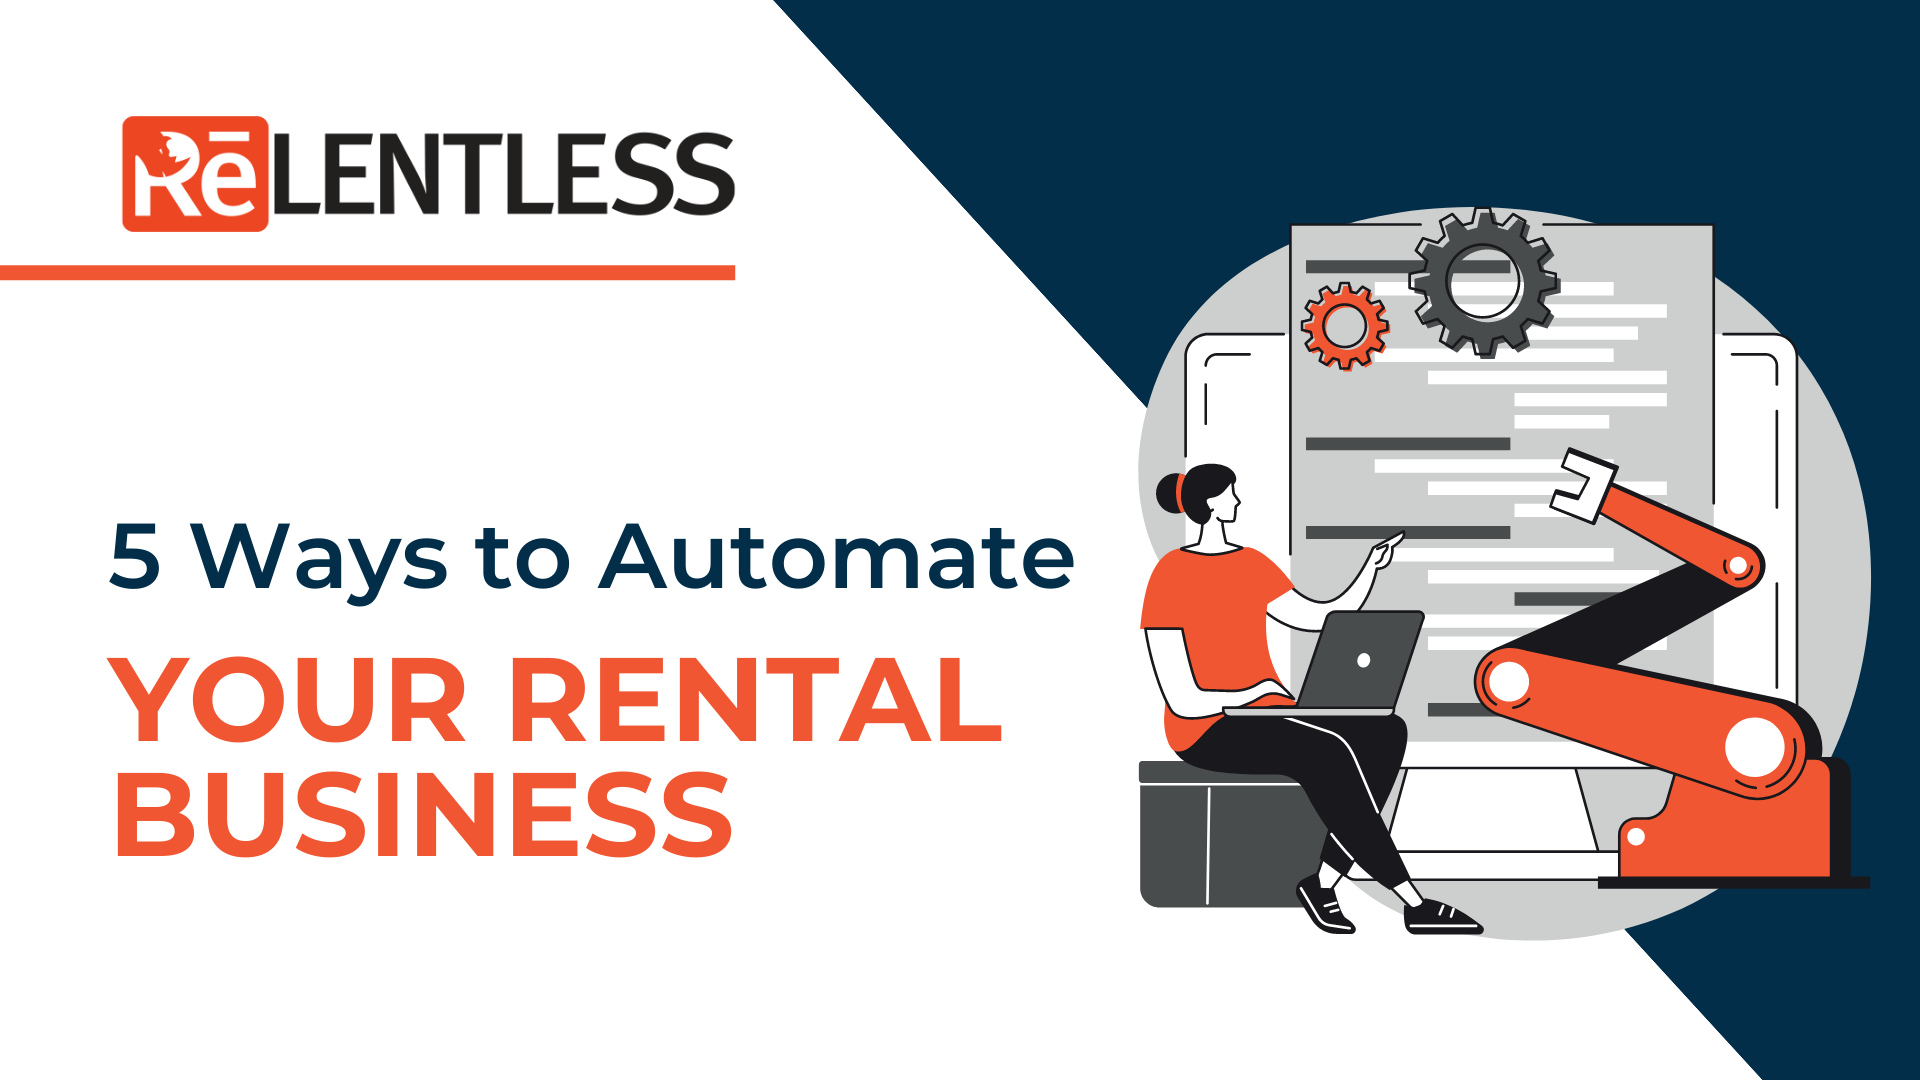 5 Ways to Automate Your Rental Business